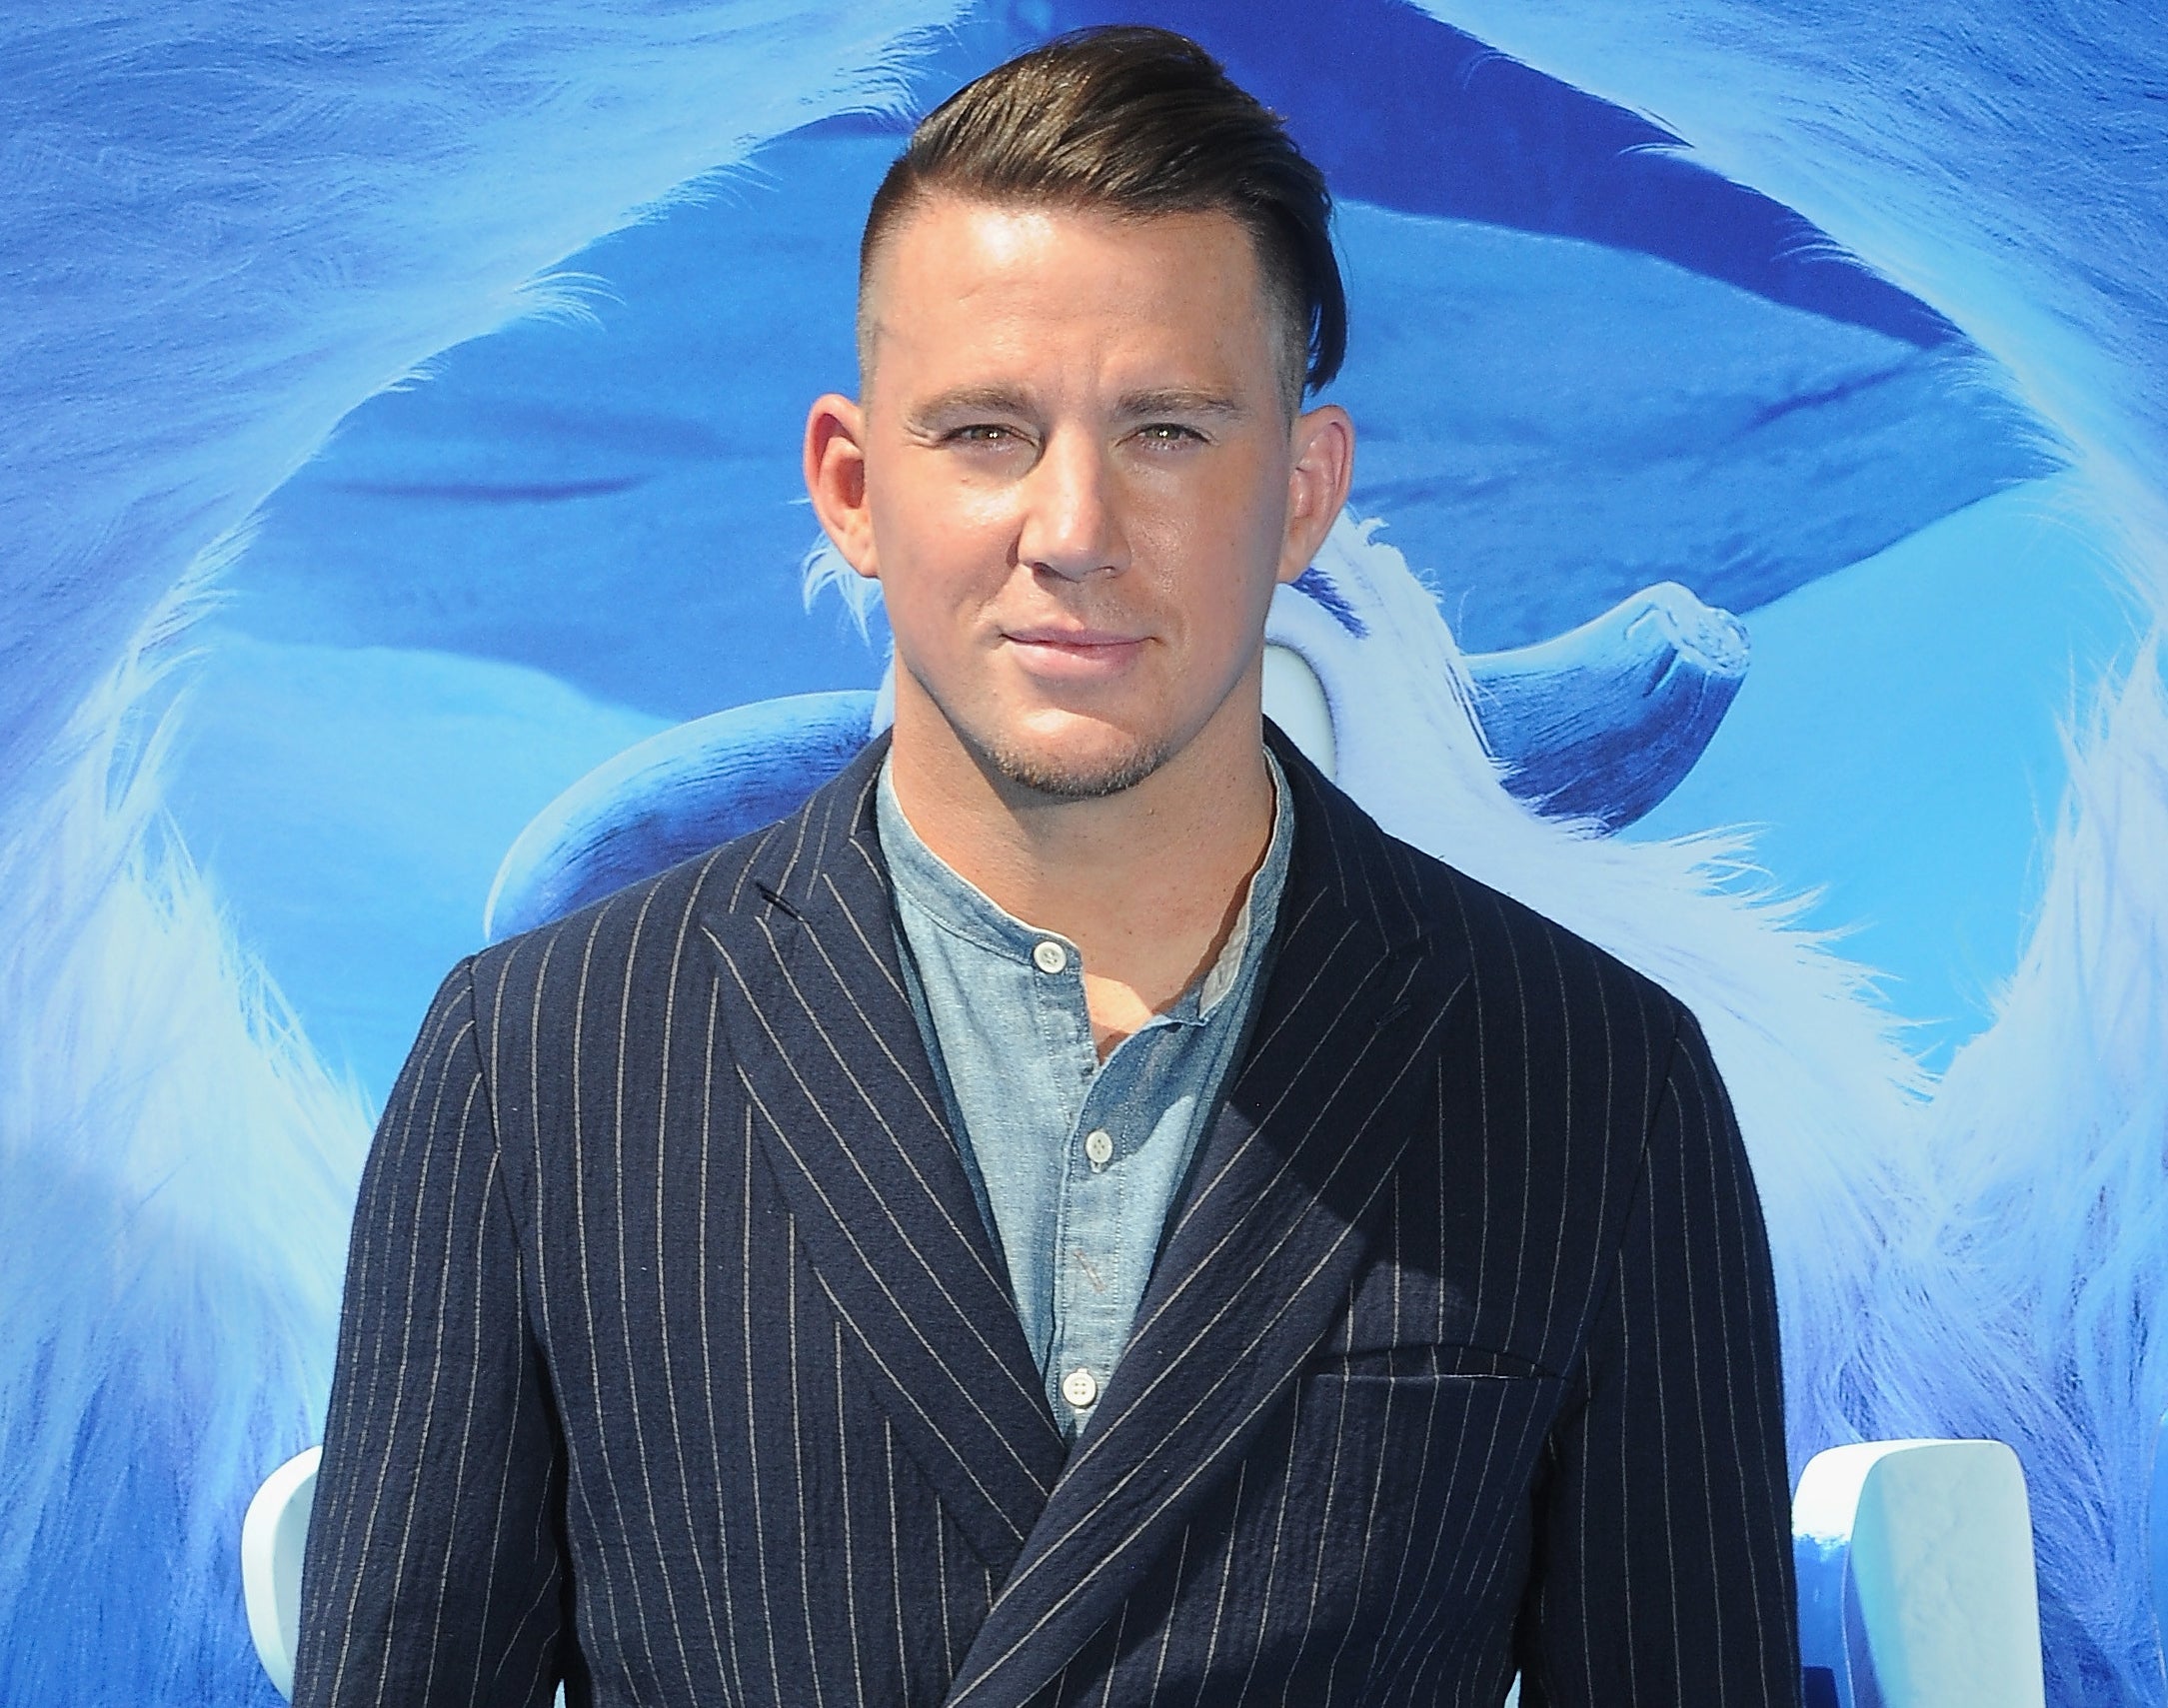 Channing wears a navy striped suit to an event